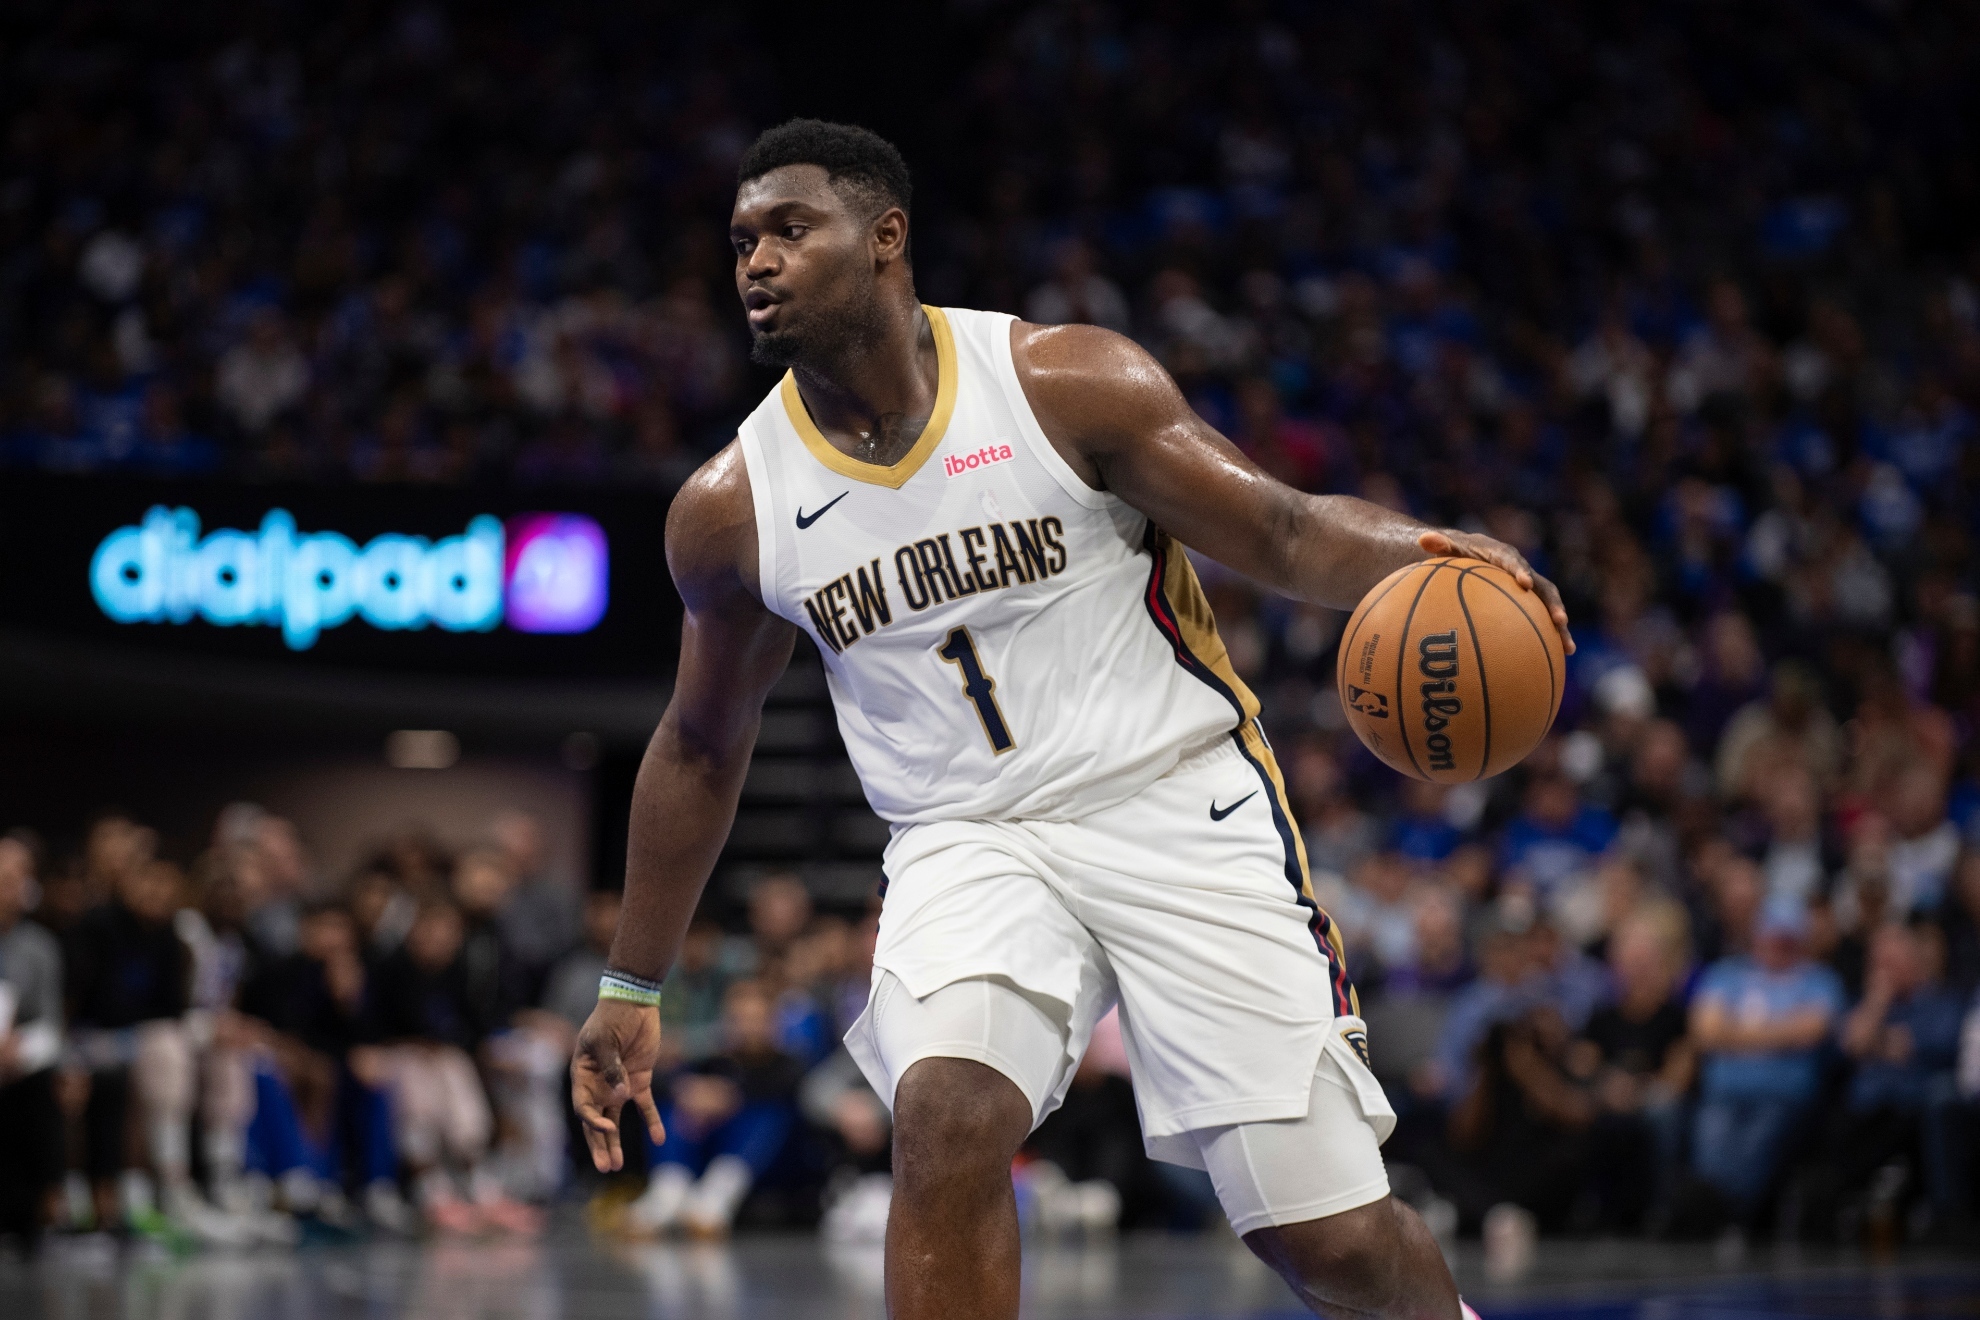 Zion Williamson playing for the Pelicans